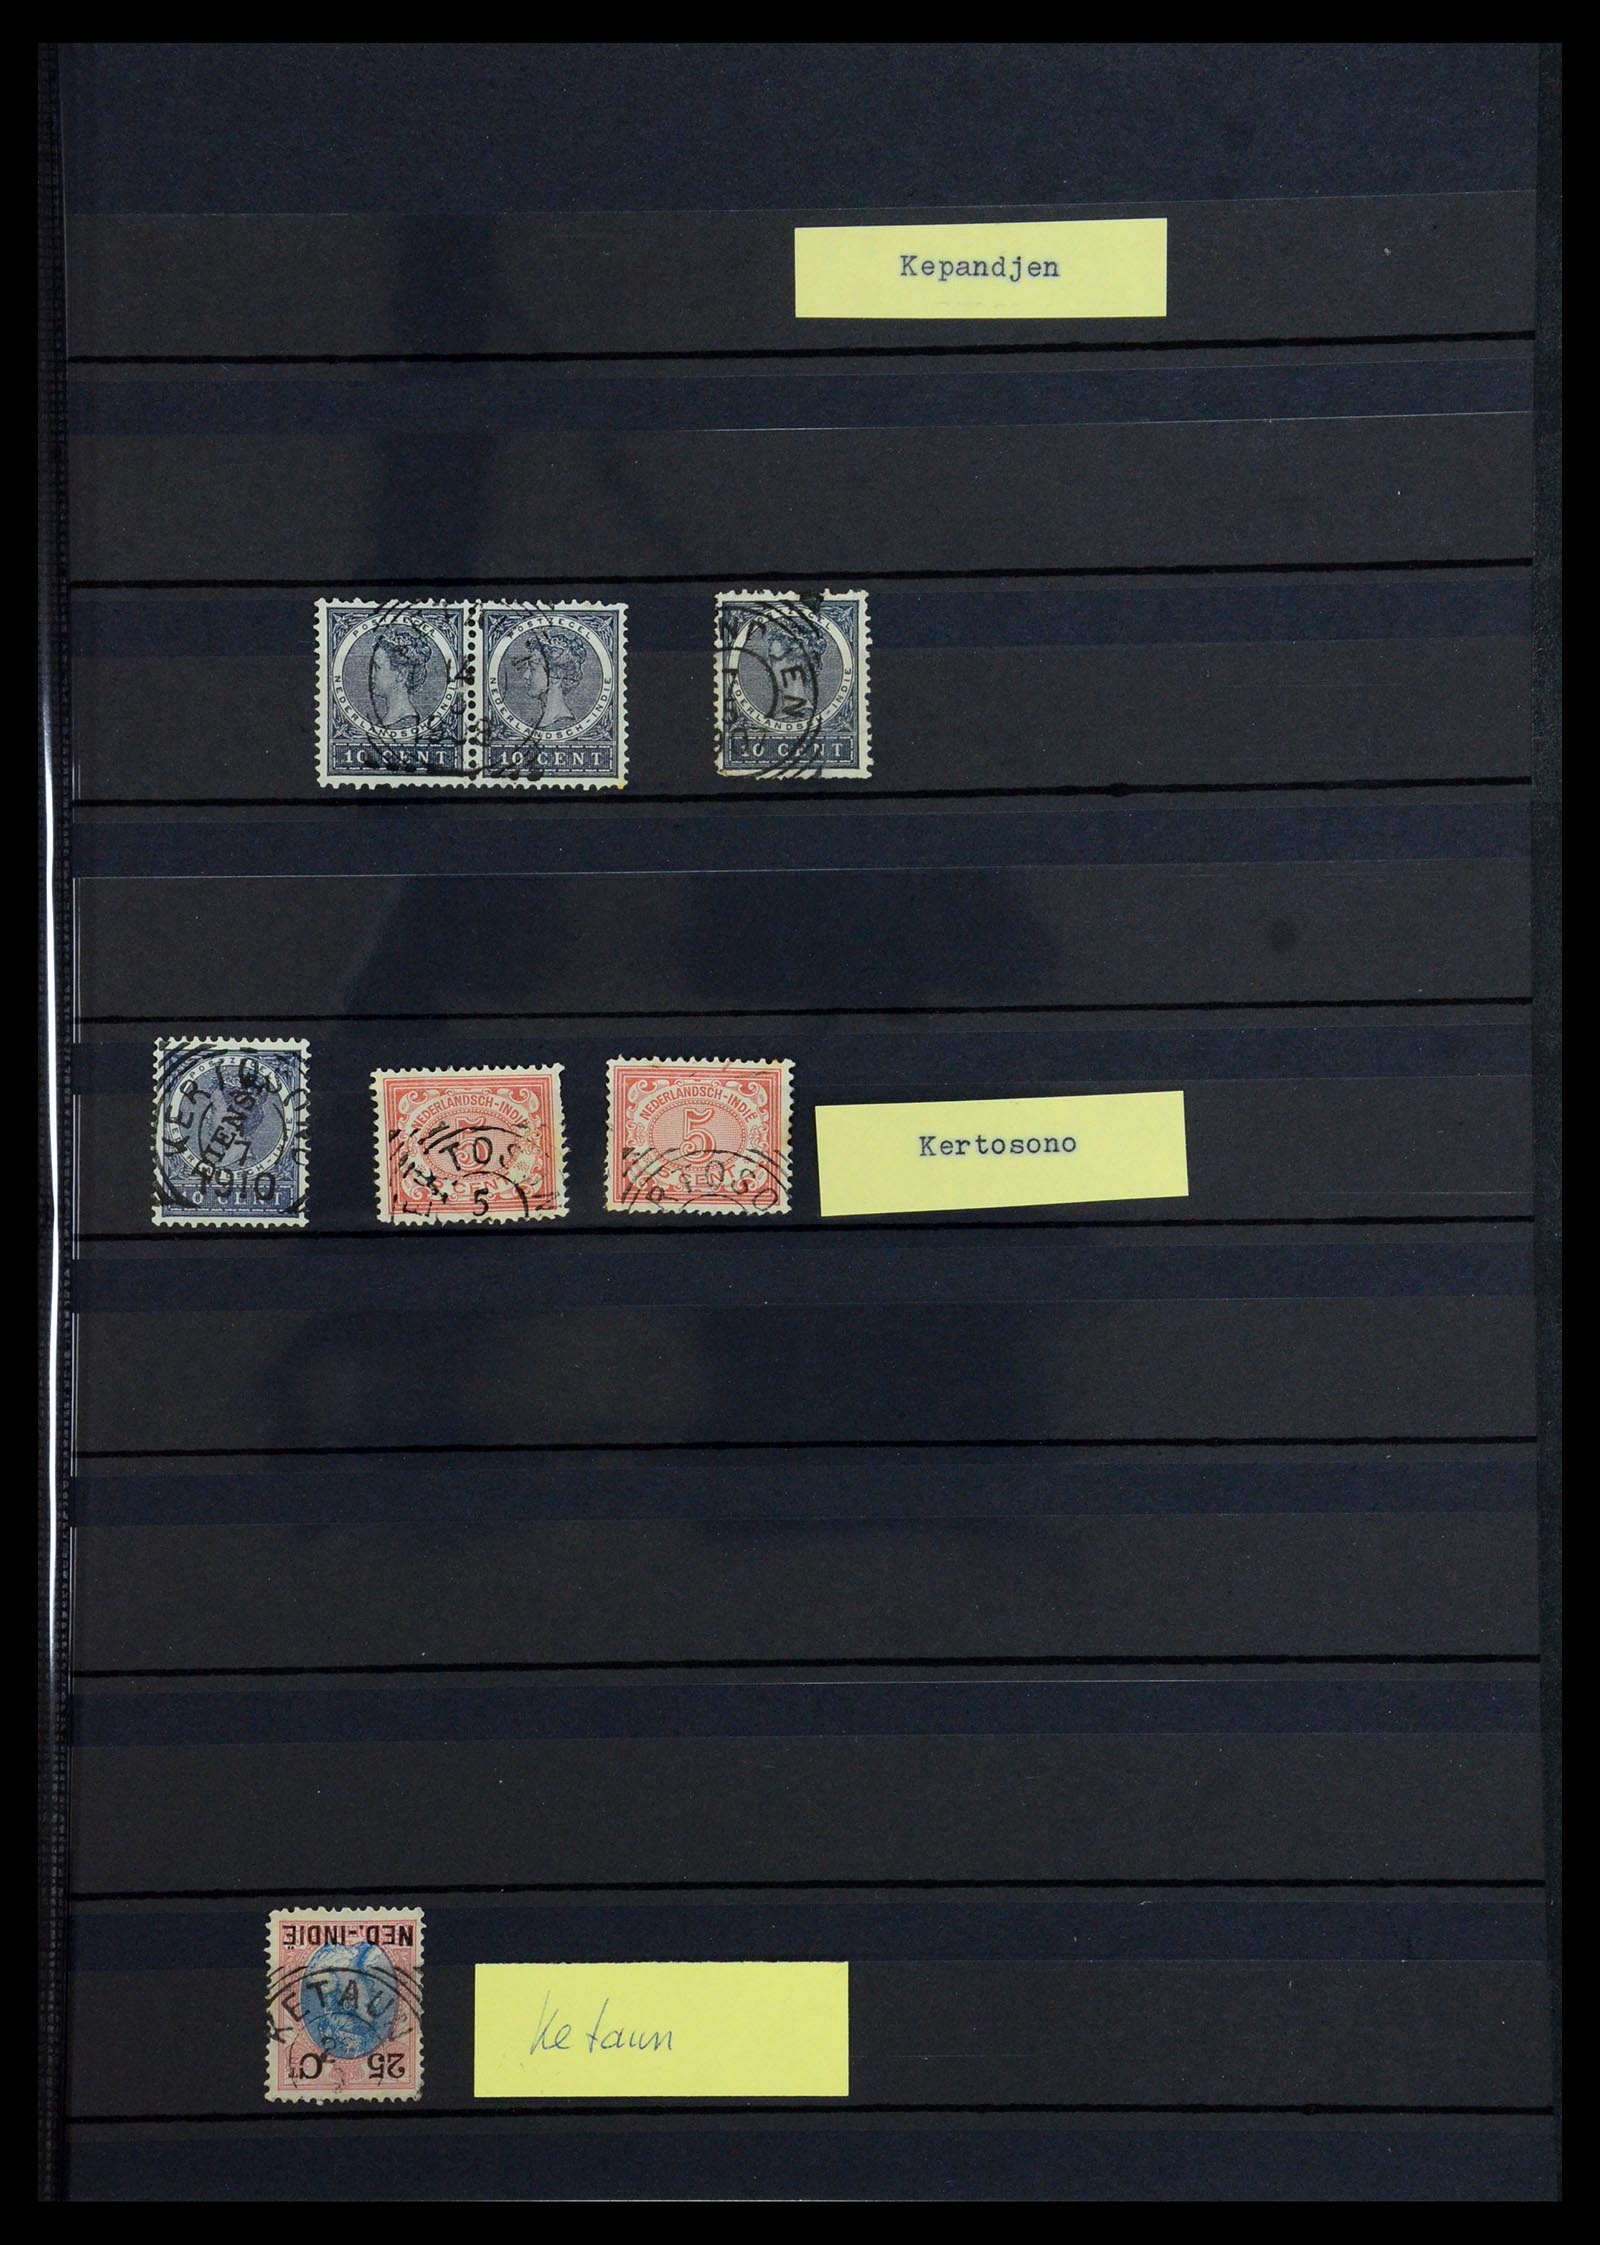 36371 021 - Stamp collection 36371 Dutch east Indies cancels.